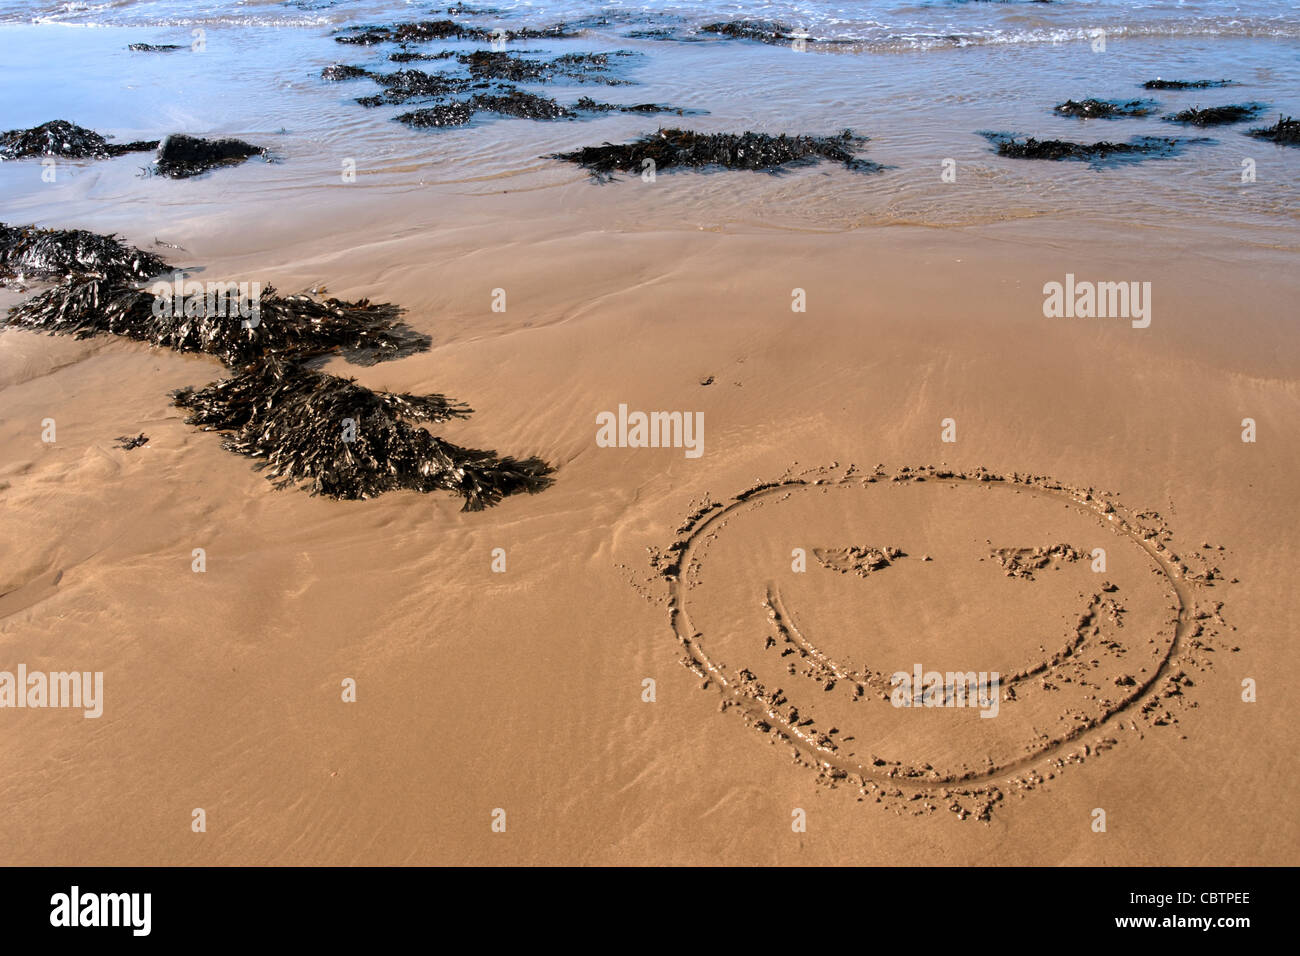 a smiley face icon inscribed on the beach with waves in the background on a hot sunny day Stock Photo